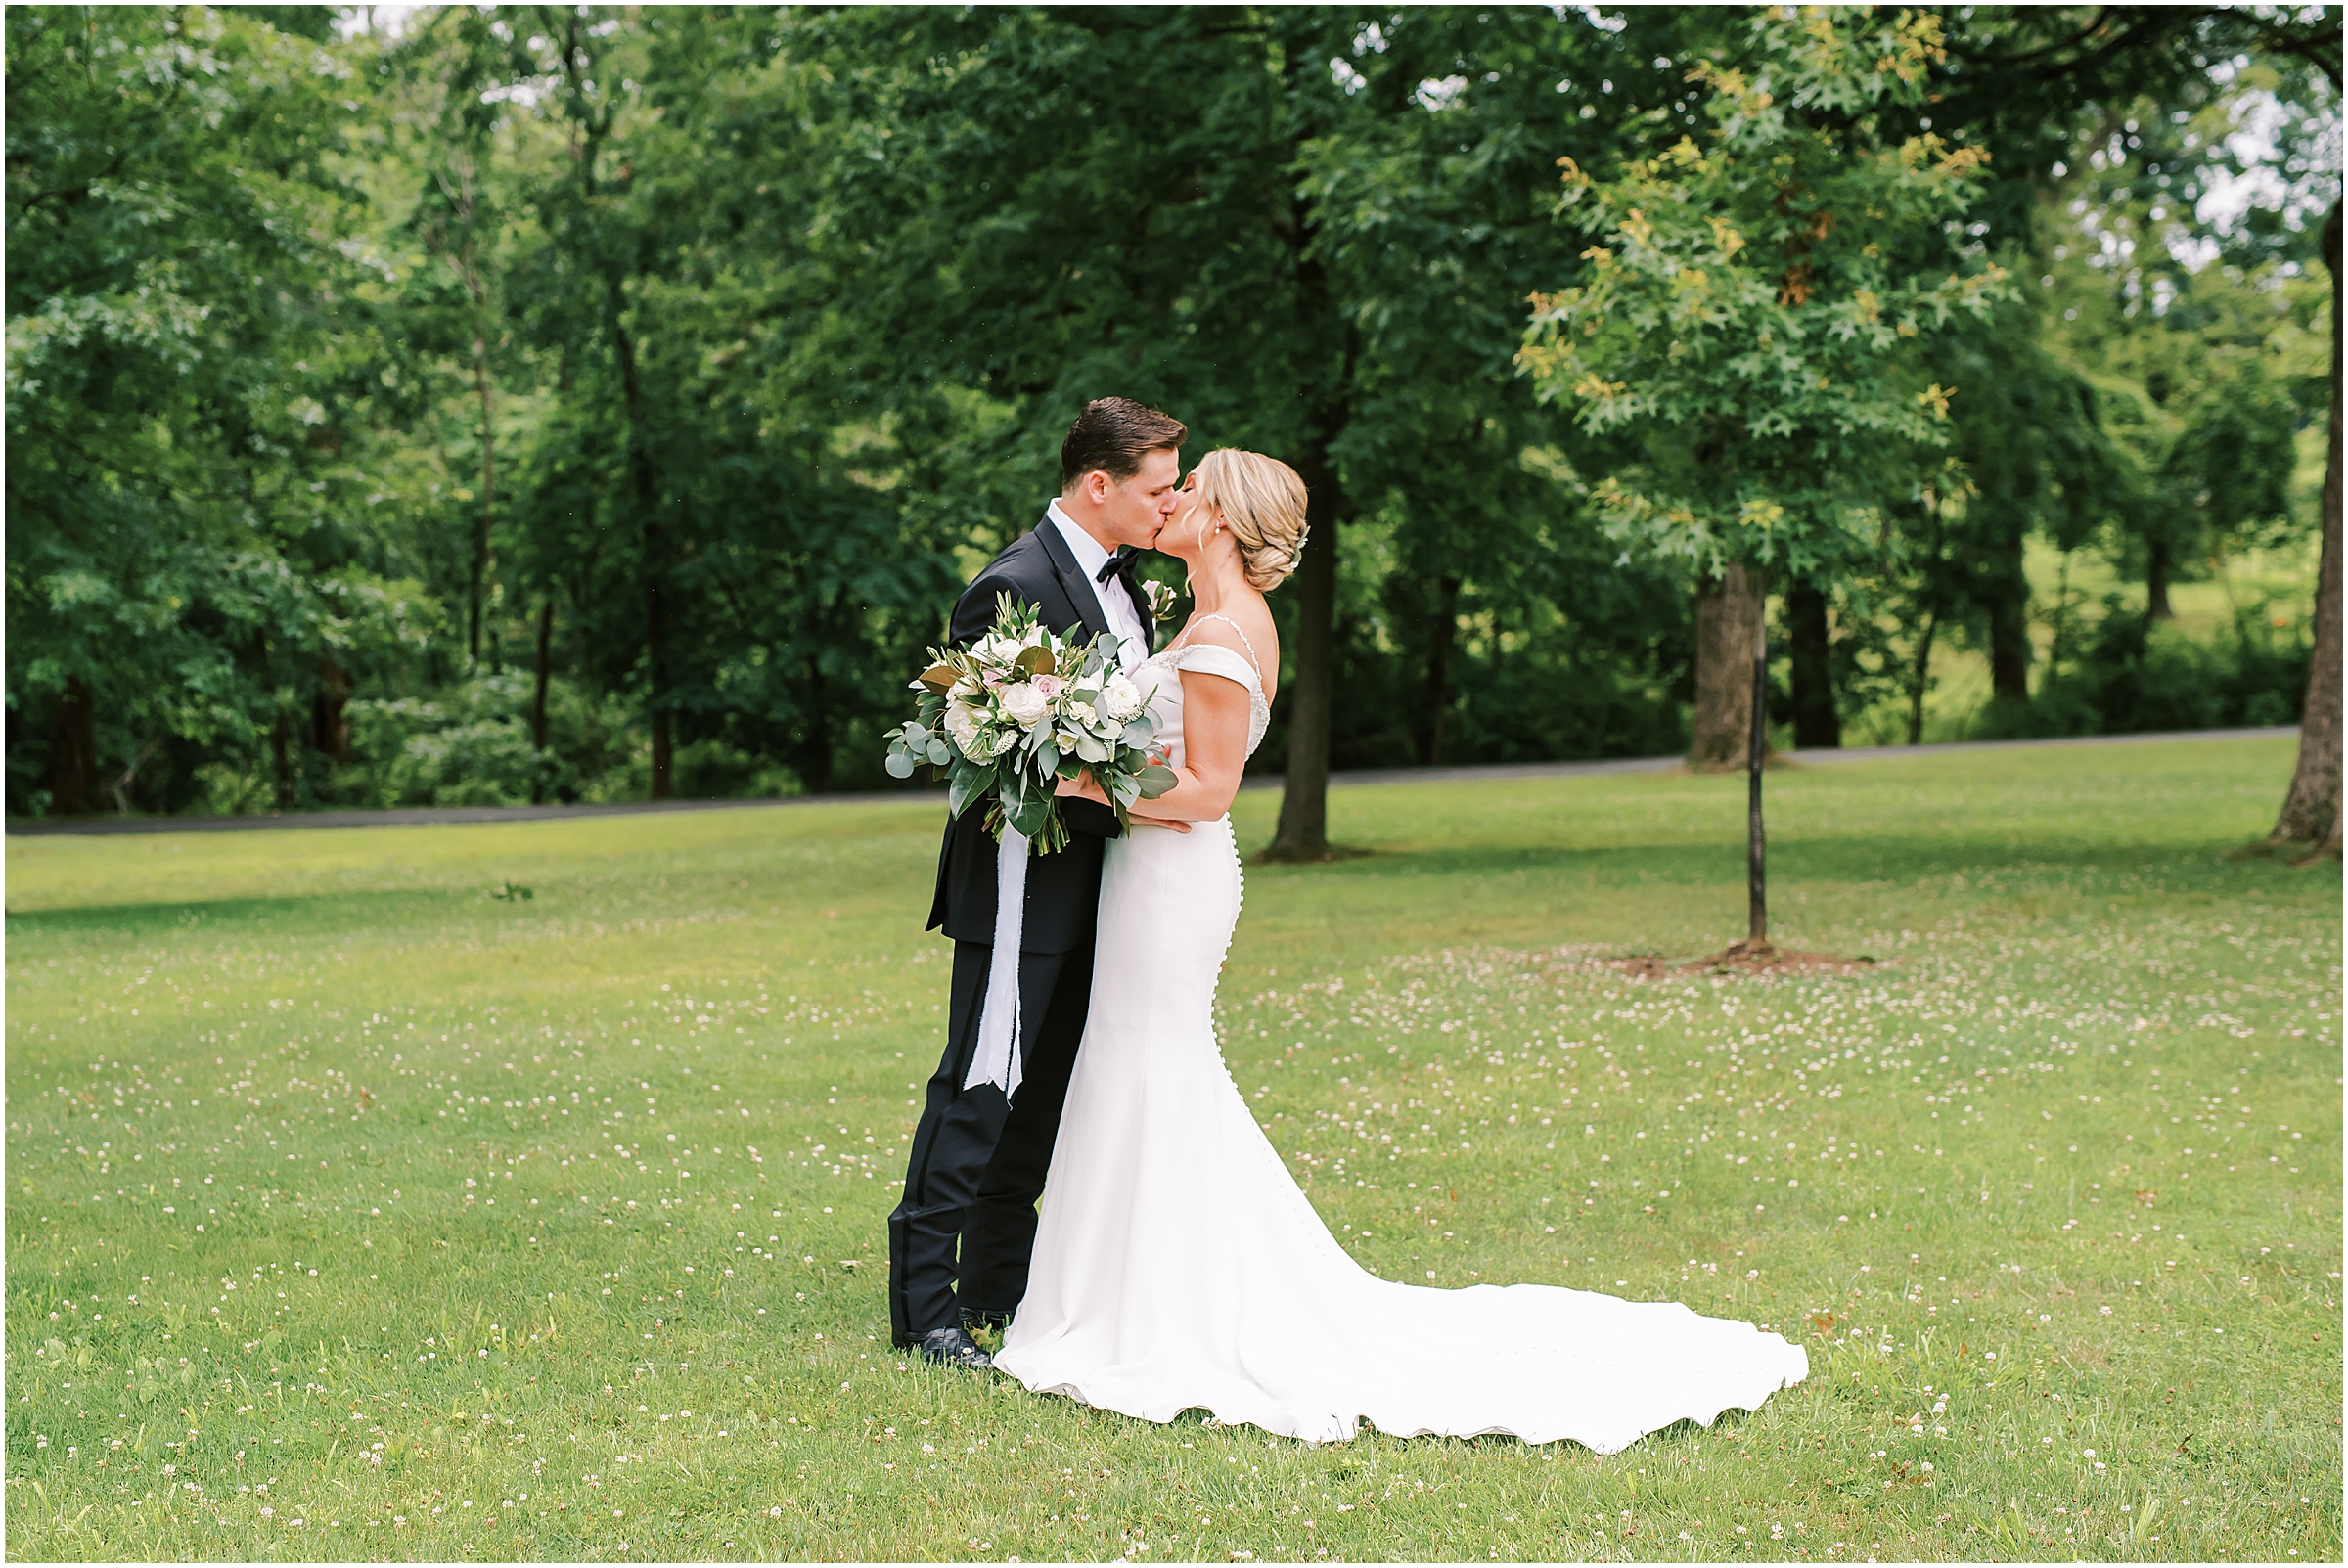 First look between bride and groom at Rust Manor House